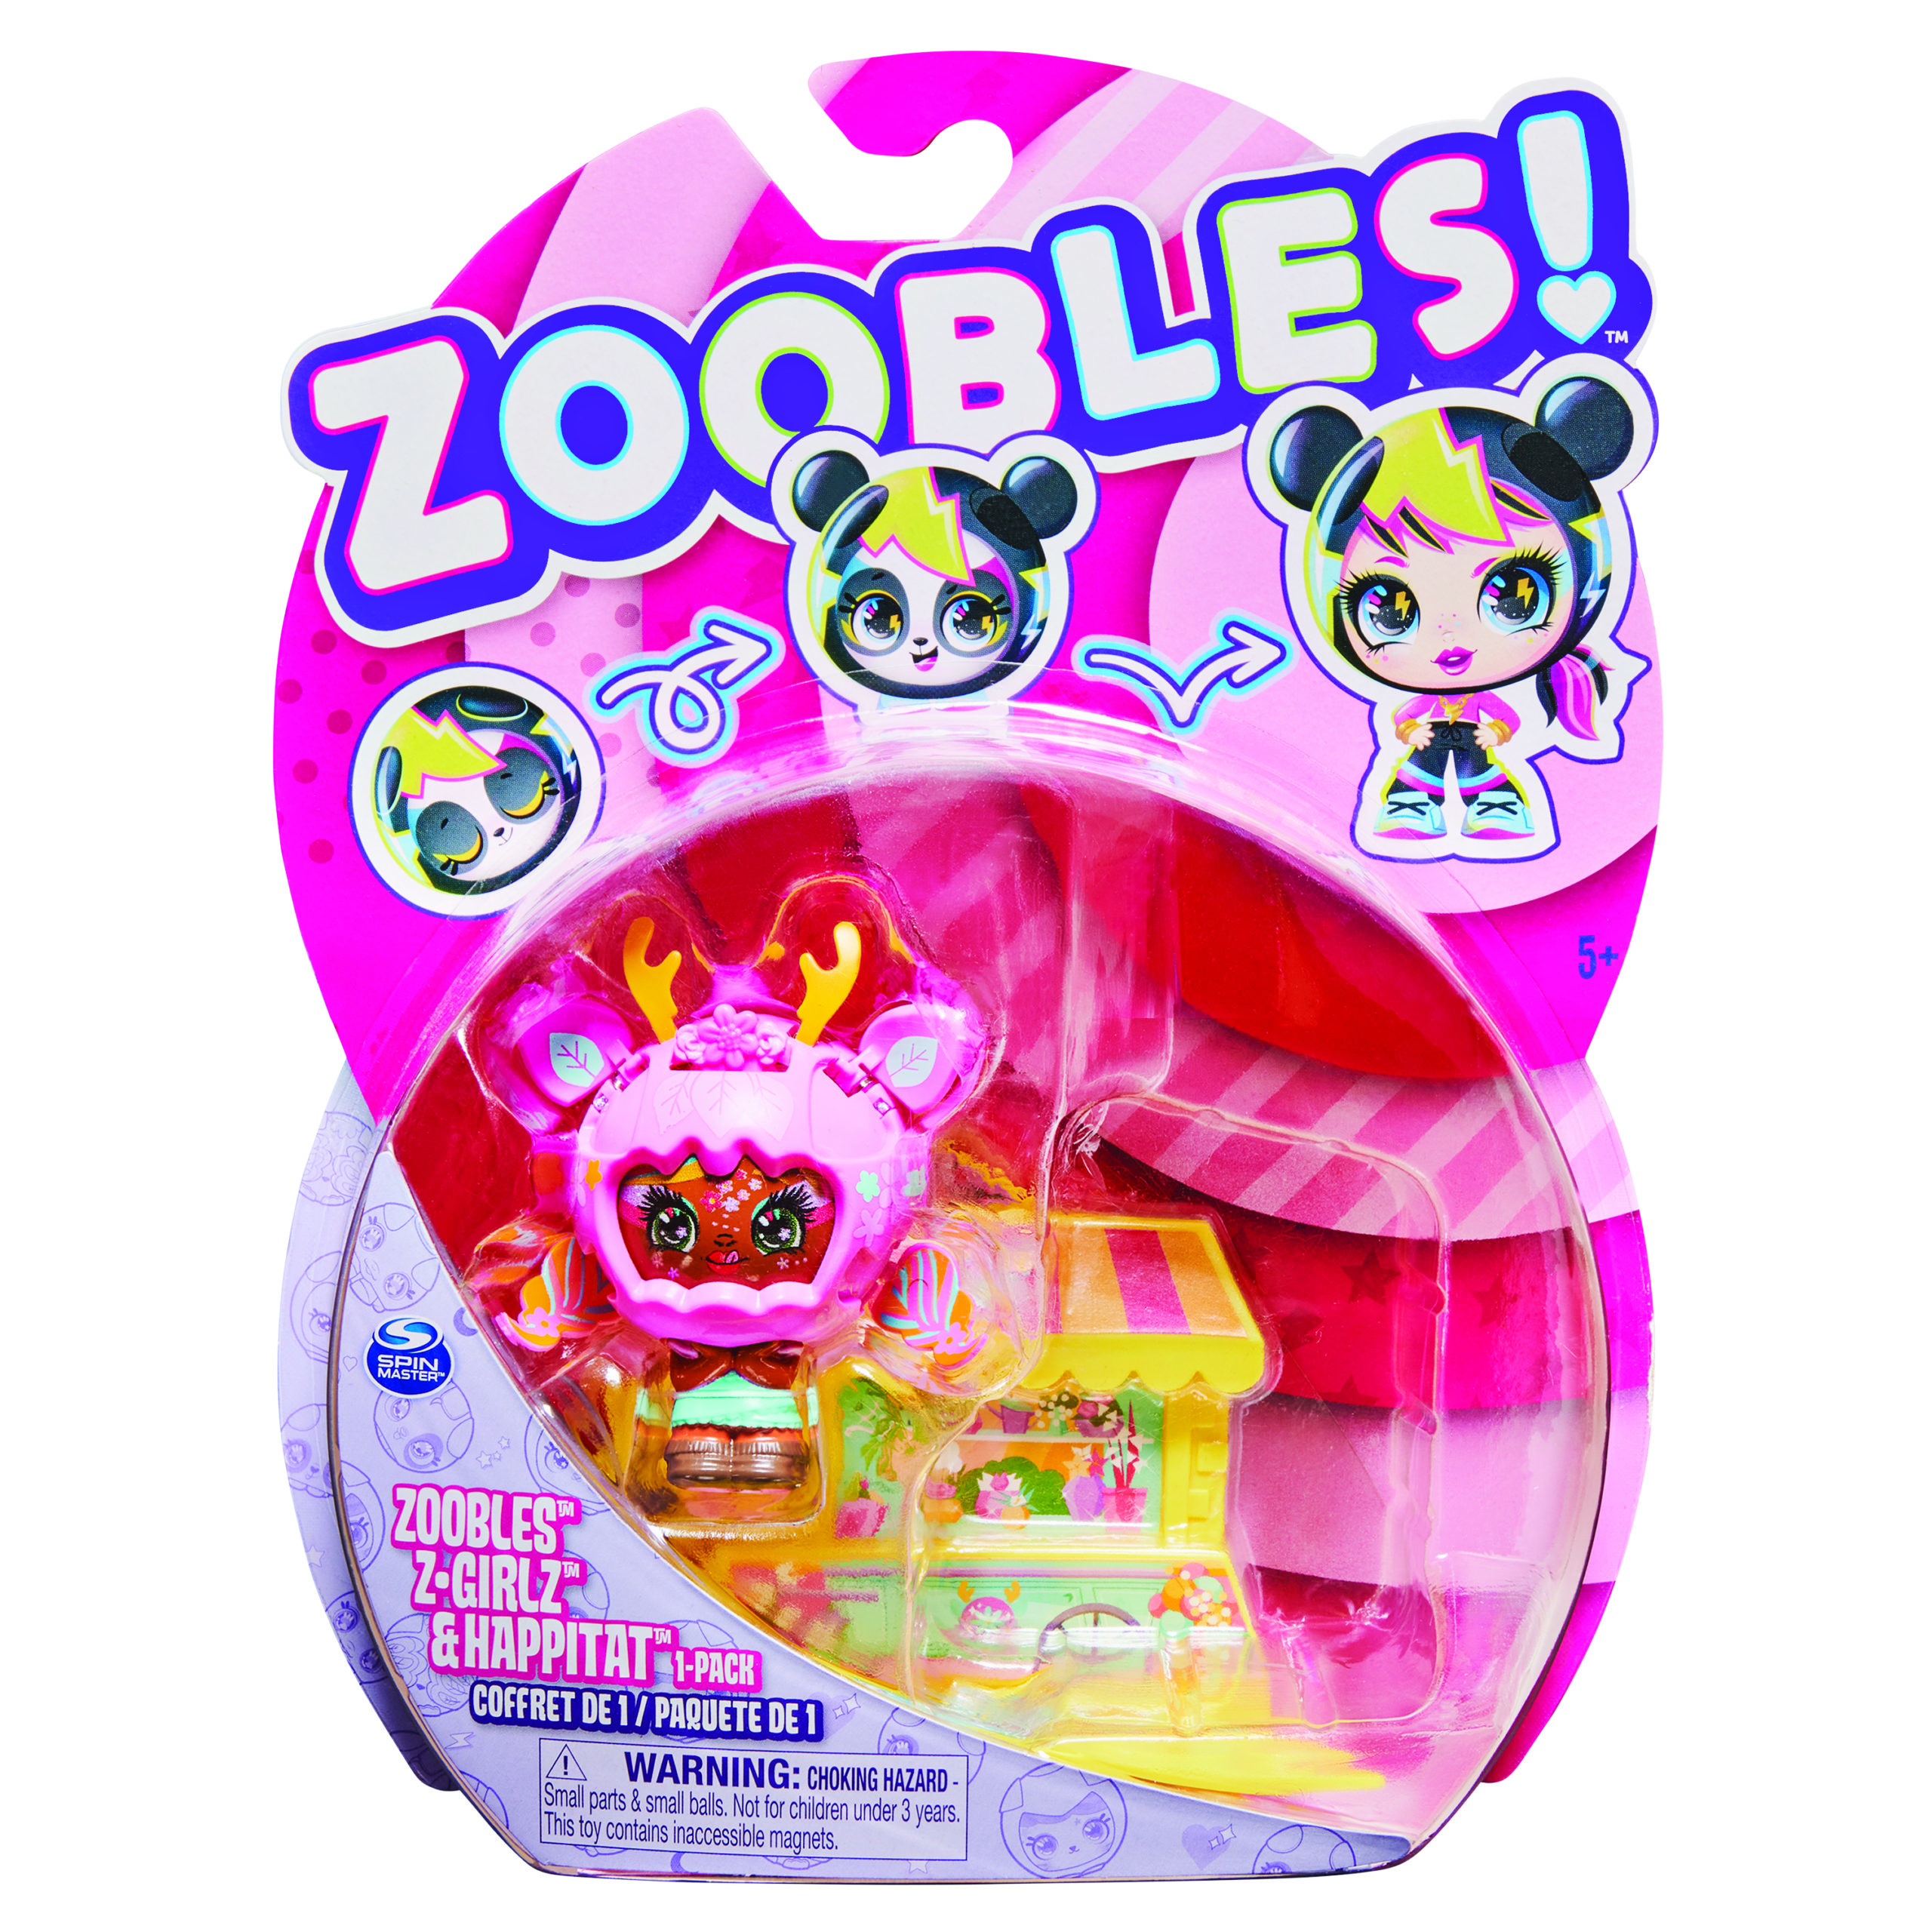 Zoobles Κοριτσάκια (10 Σχέδια) 6061365 - Spin Master, Zoobles